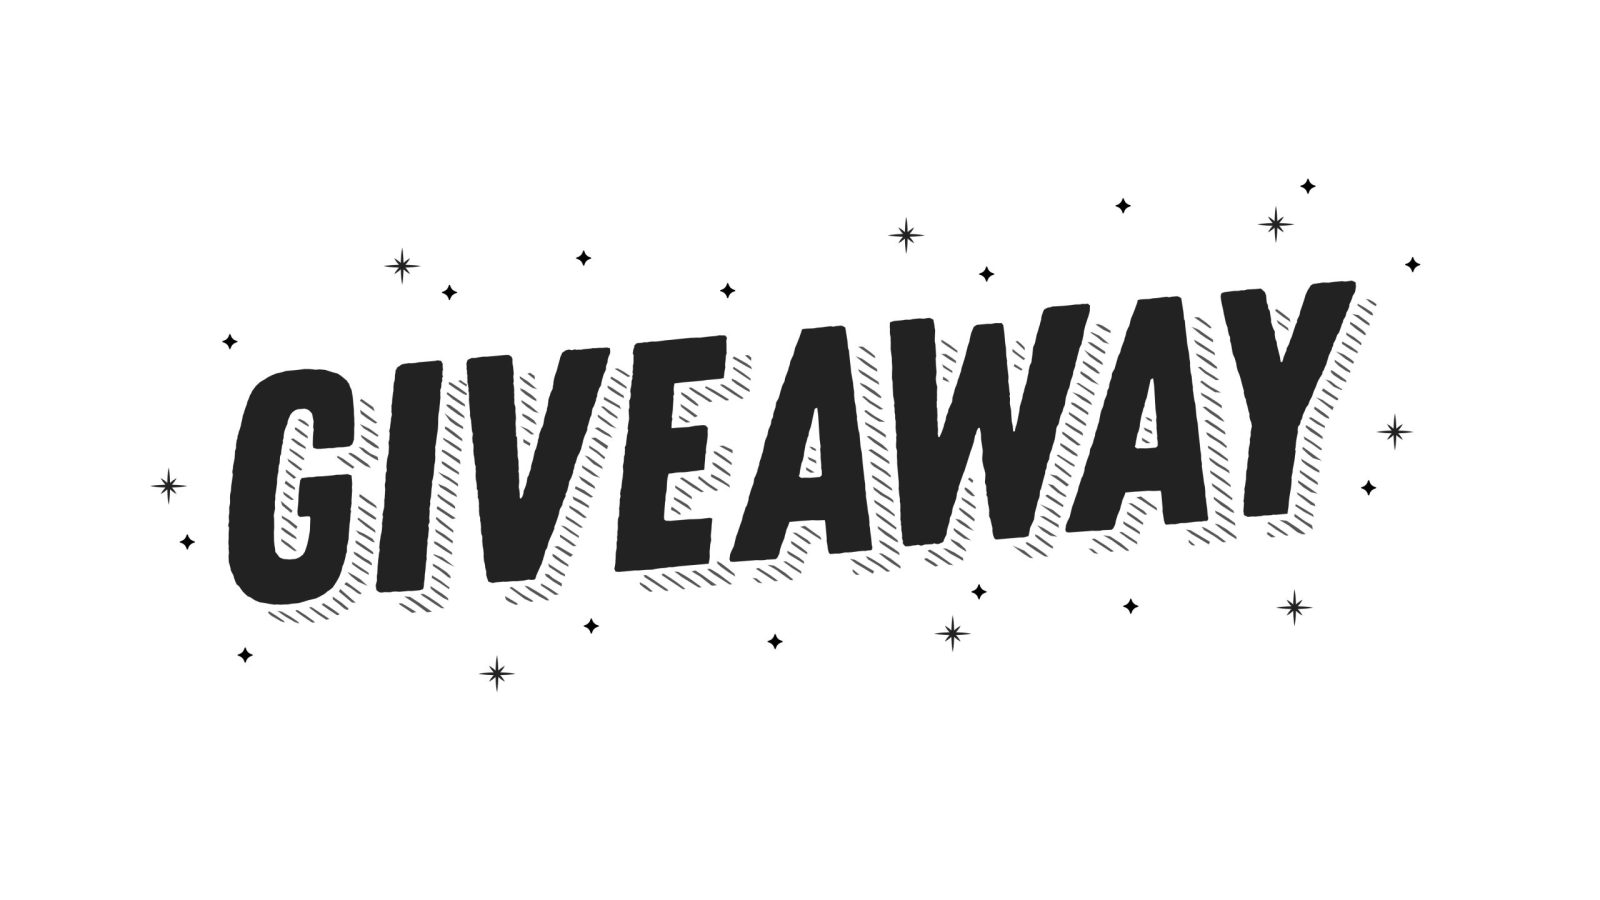 Giveaway Text, Giveaway Banner, Win a Prize Text, Vector Illustration Background